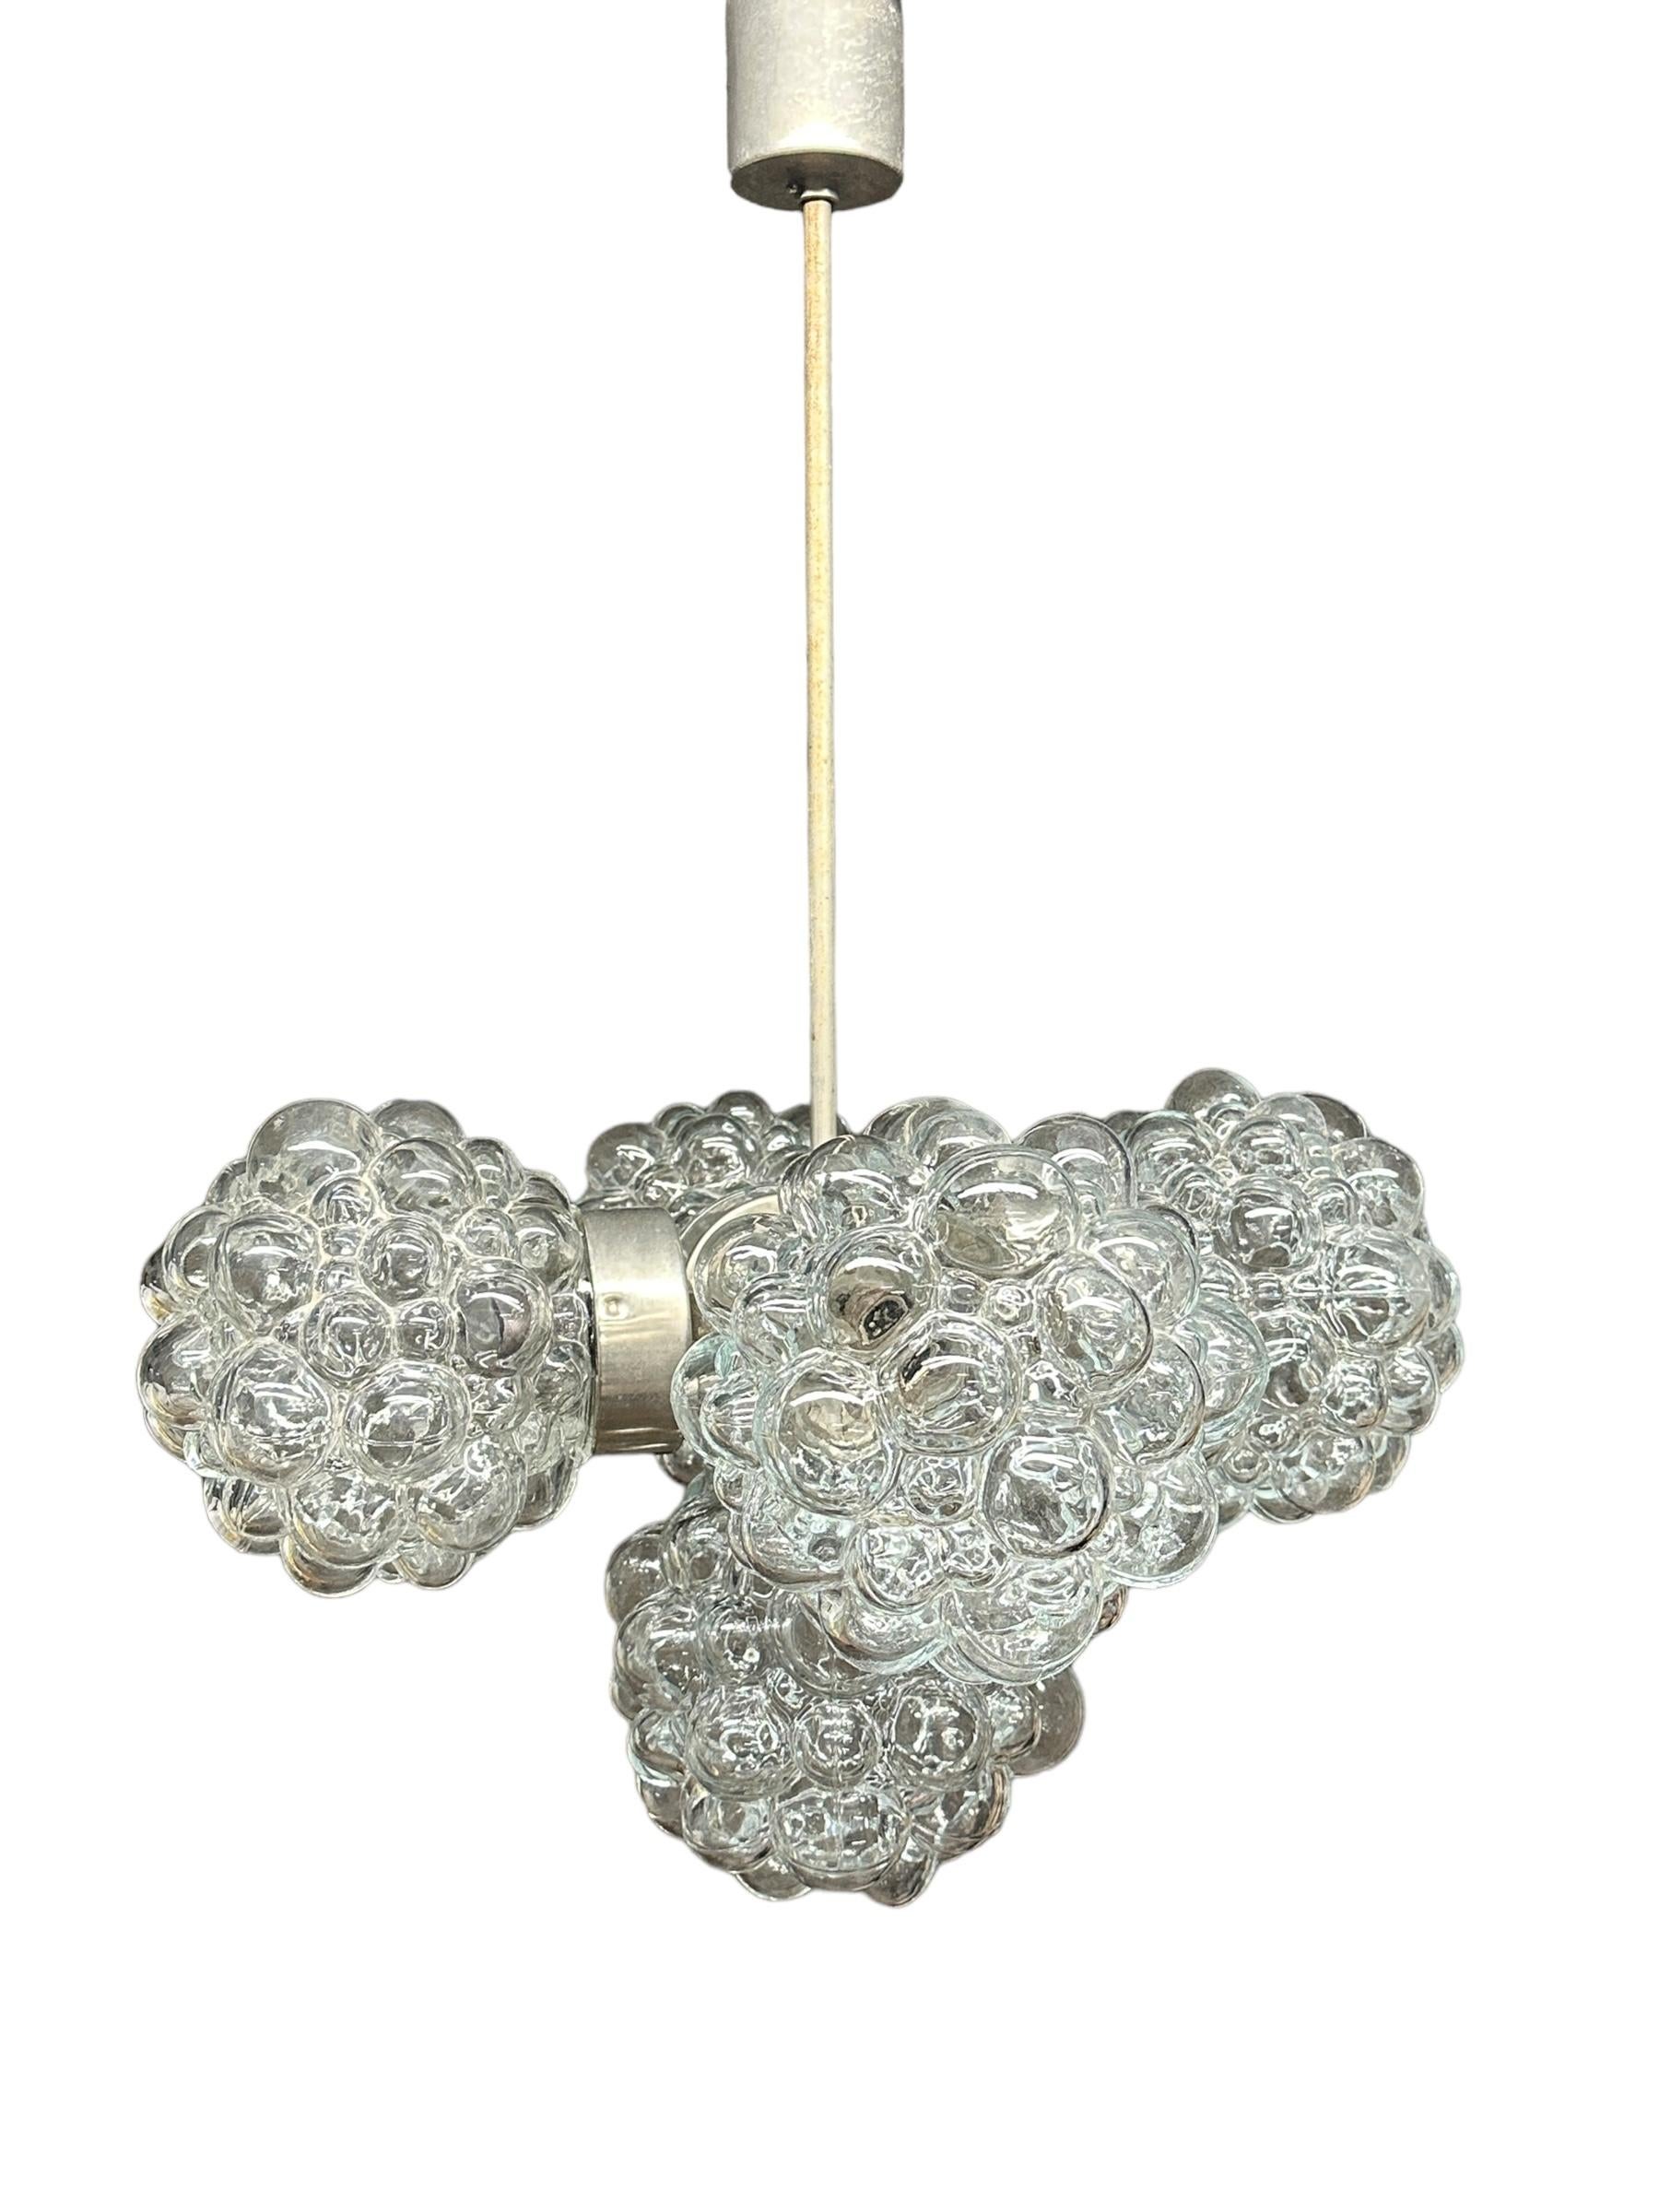 Mid-Century Modern 5 Light Bubble Glass Helena Tynell Style Chandelier, Austria 1960s For Sale